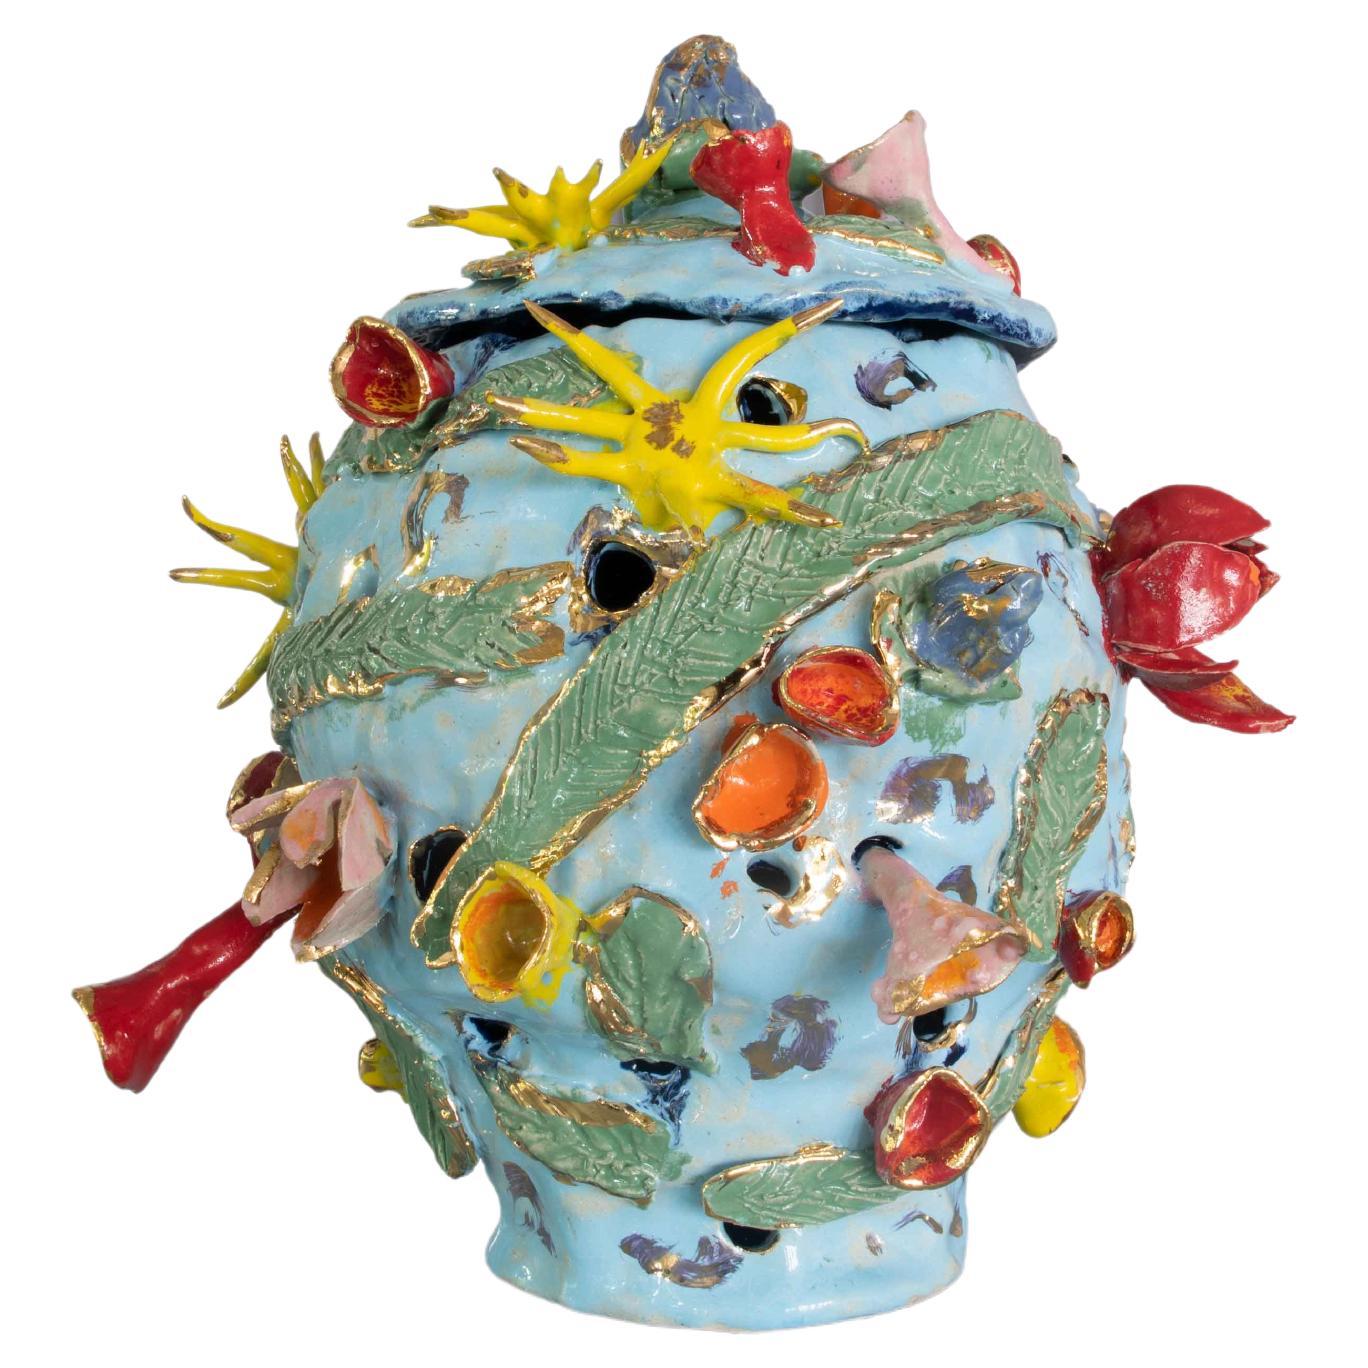 Urn for Unwanted Limbs and Other Things by Virginia Leonard Contemporary Ceramic